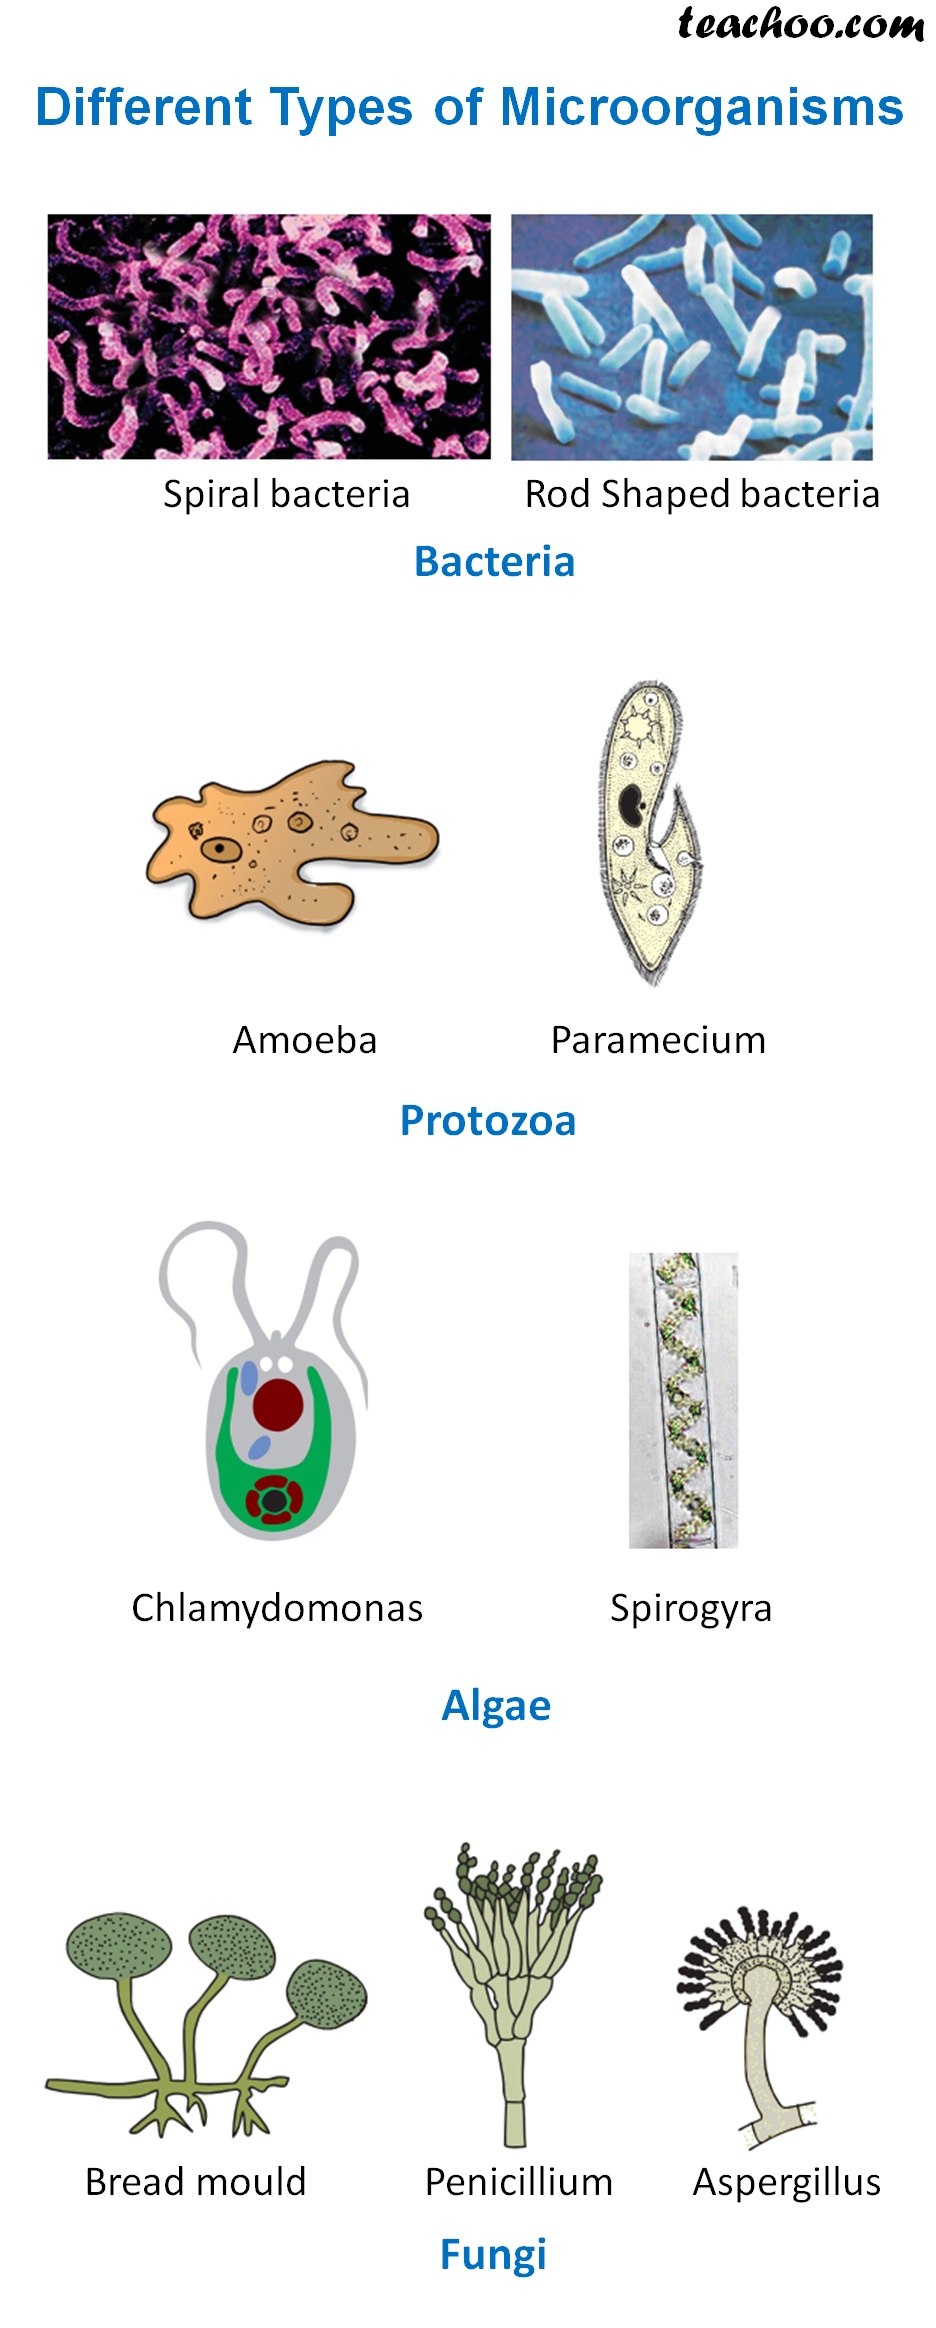 microorganisms research topics